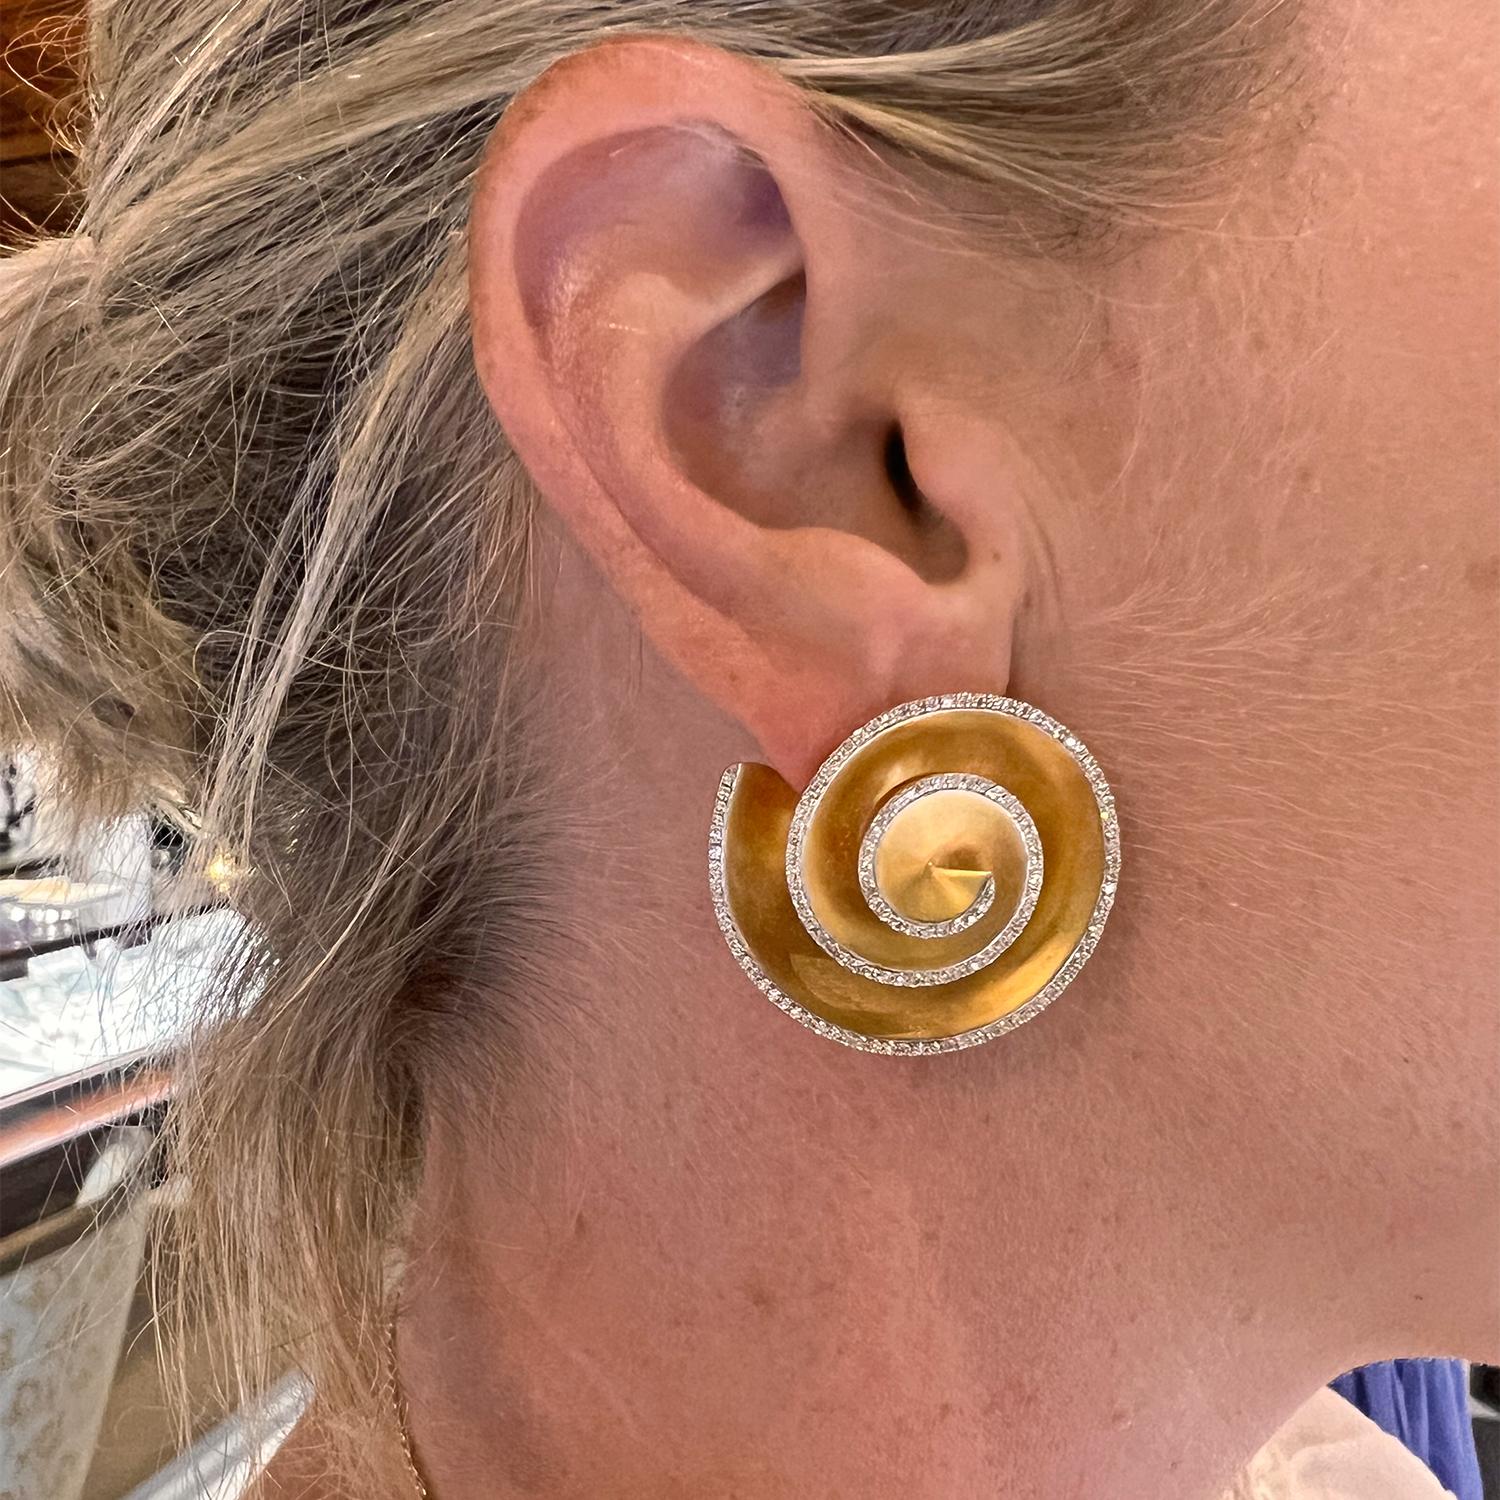 Fibonacci spiral design earrings in 18k yellow gold, the edges adorned by round brilliant-cut diamonds.  Posts with friction backs for pierced ears. 1.25